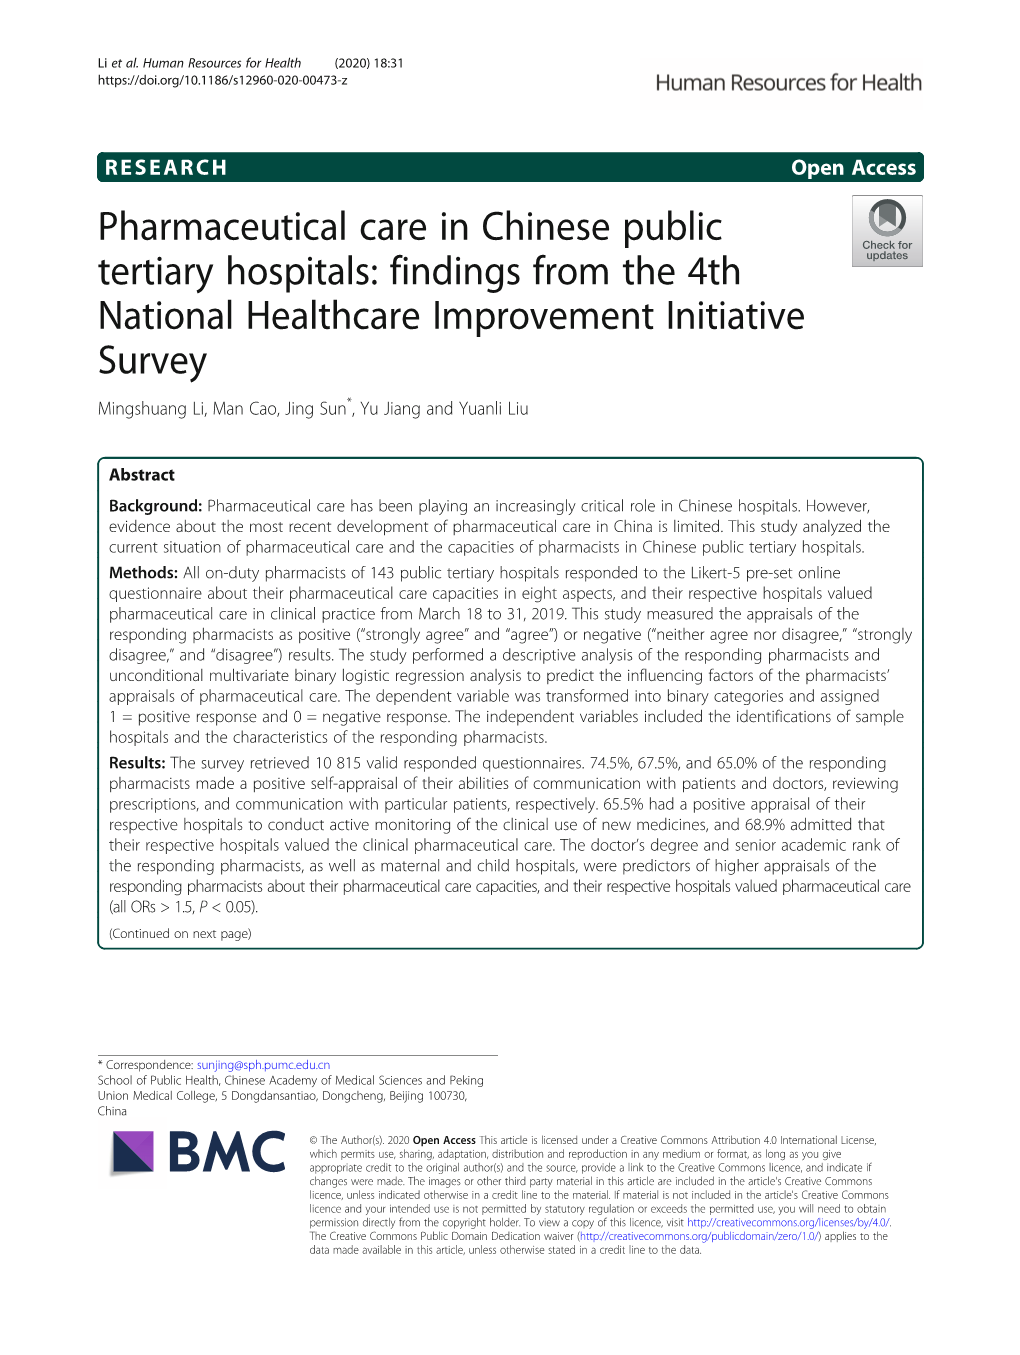 Pharmaceutical Care in Chinese Public Tertiary Hospitals